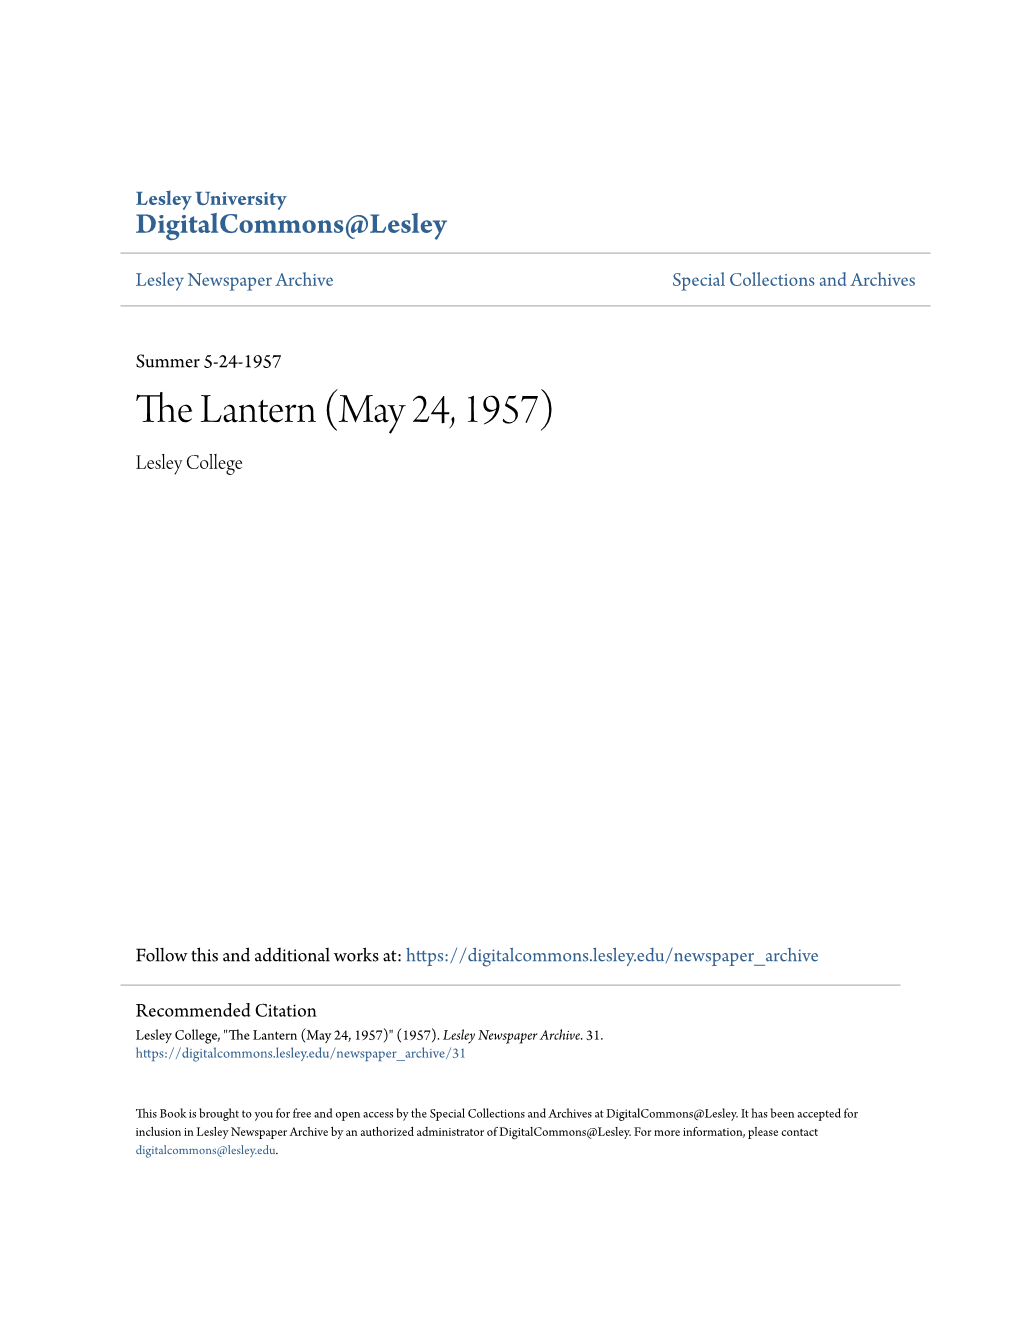 The Lantern (May 24, 1957) Lesley College